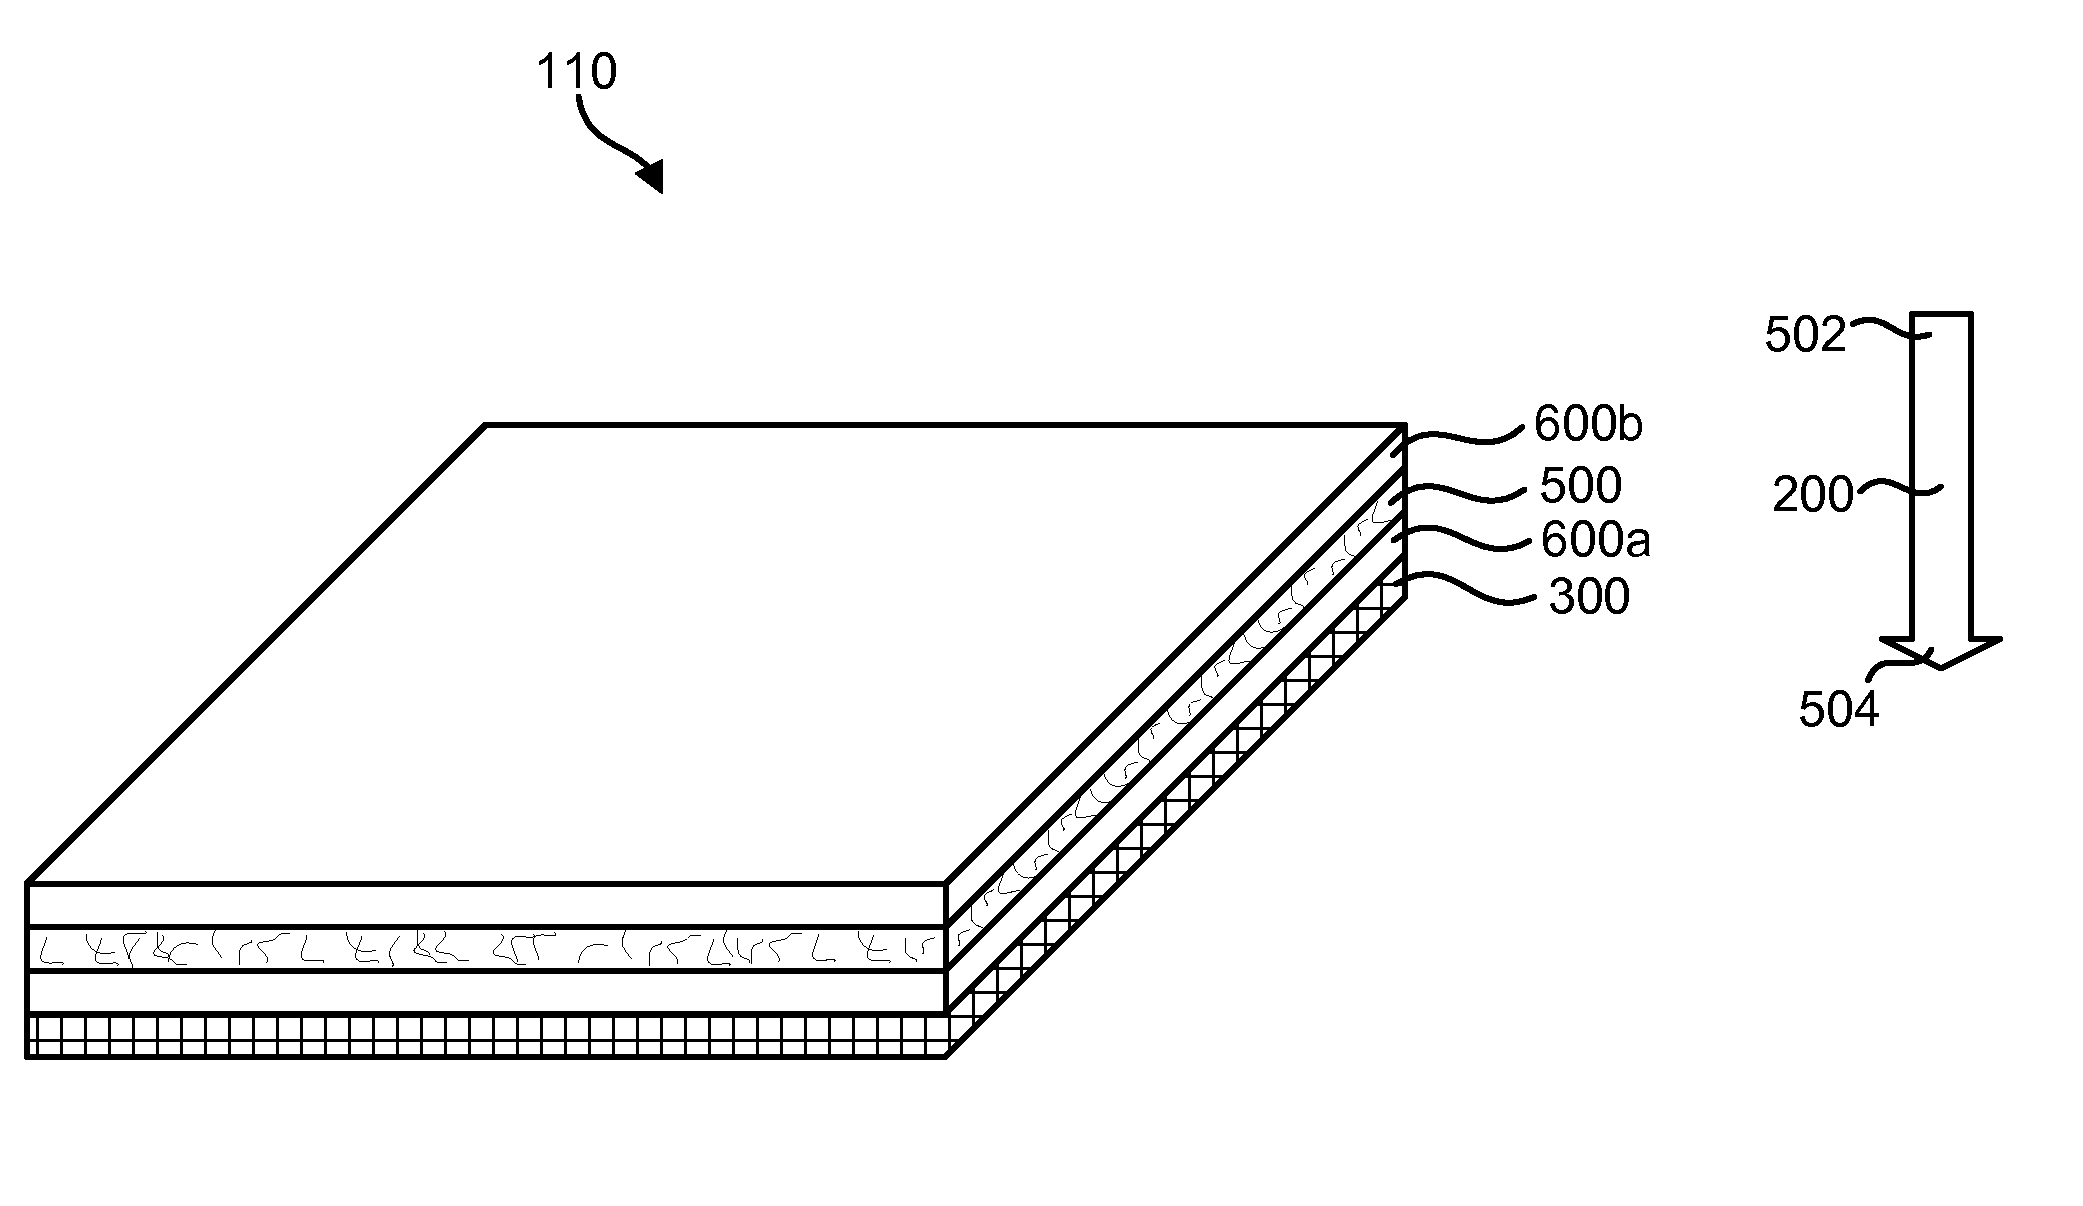 Fluid filter support layer